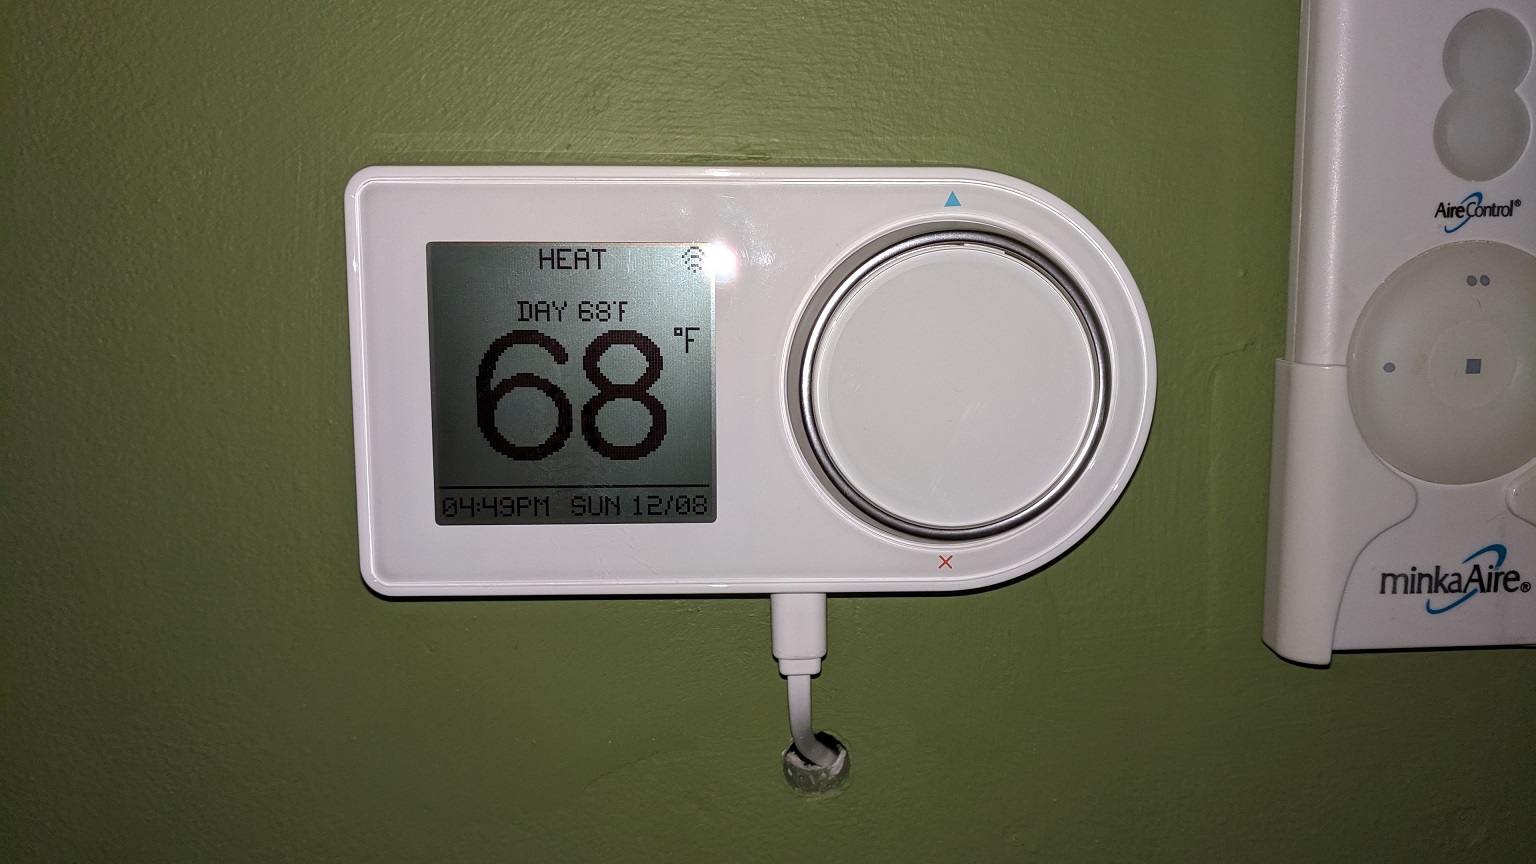 A Smart Thermostat for the Living Room